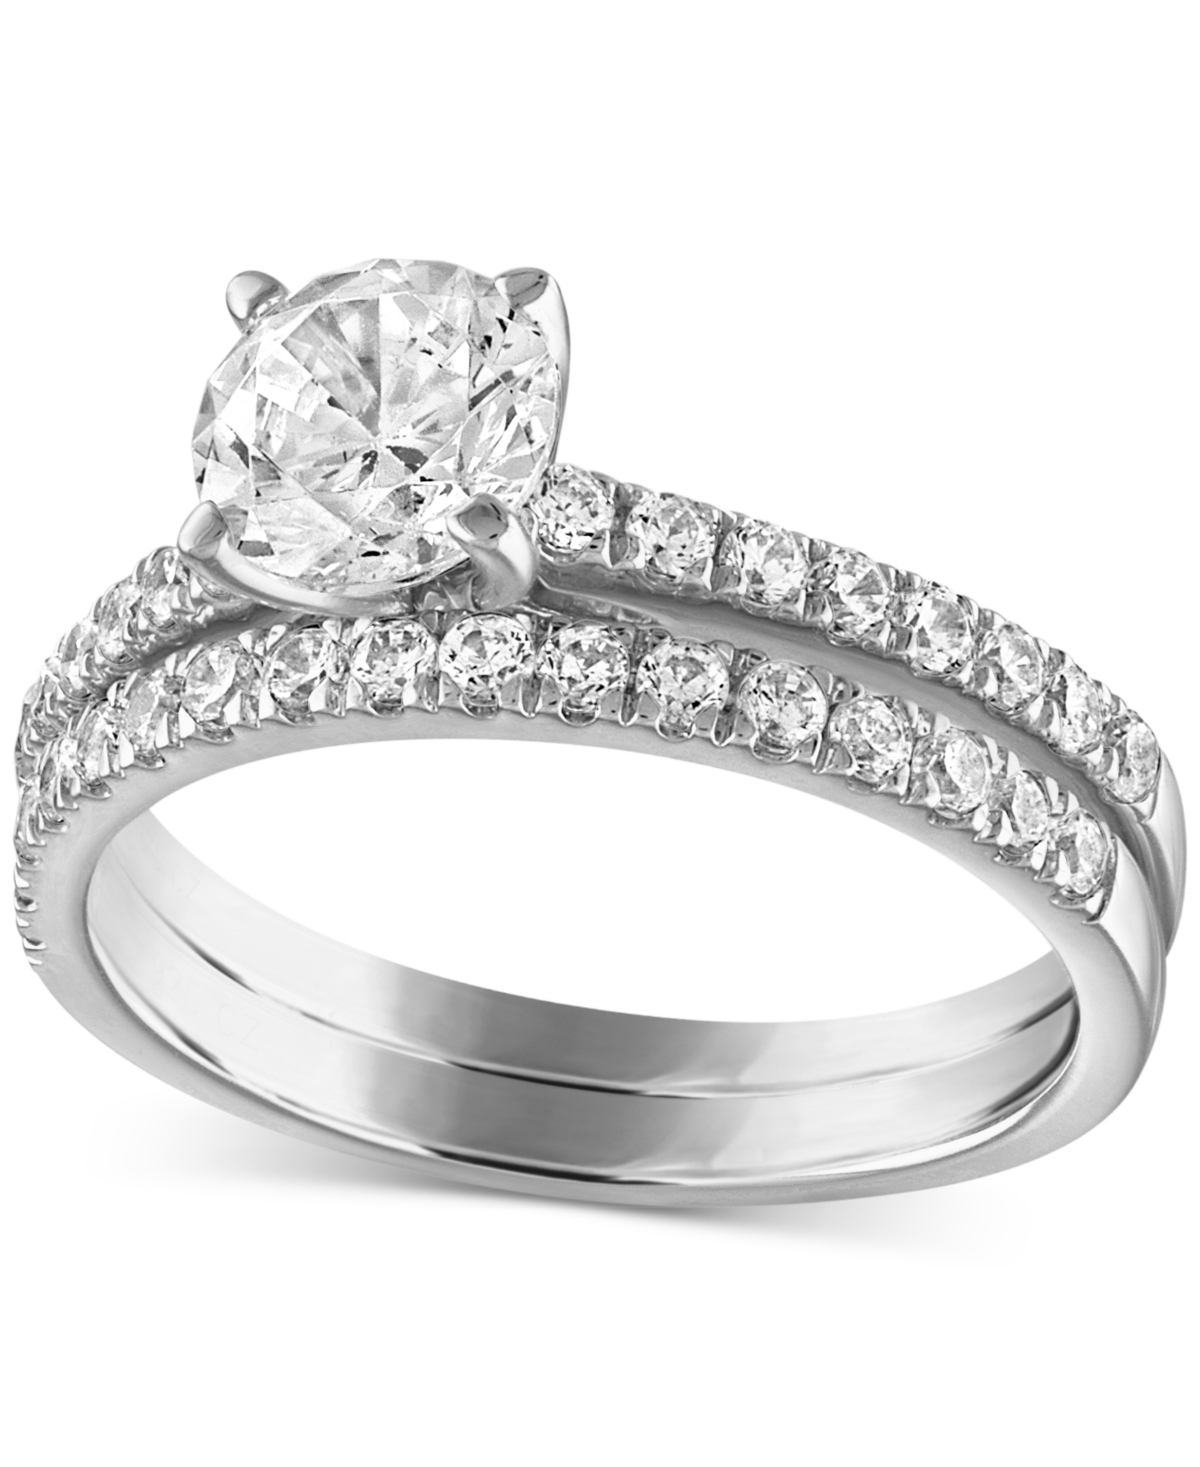 Certified Diamond Bridal Set (1-1/2 ct. t.w.) in 14k White Gold Featuring Diamonds with the De Beers Code of Origin, Created for Macy's - Whit